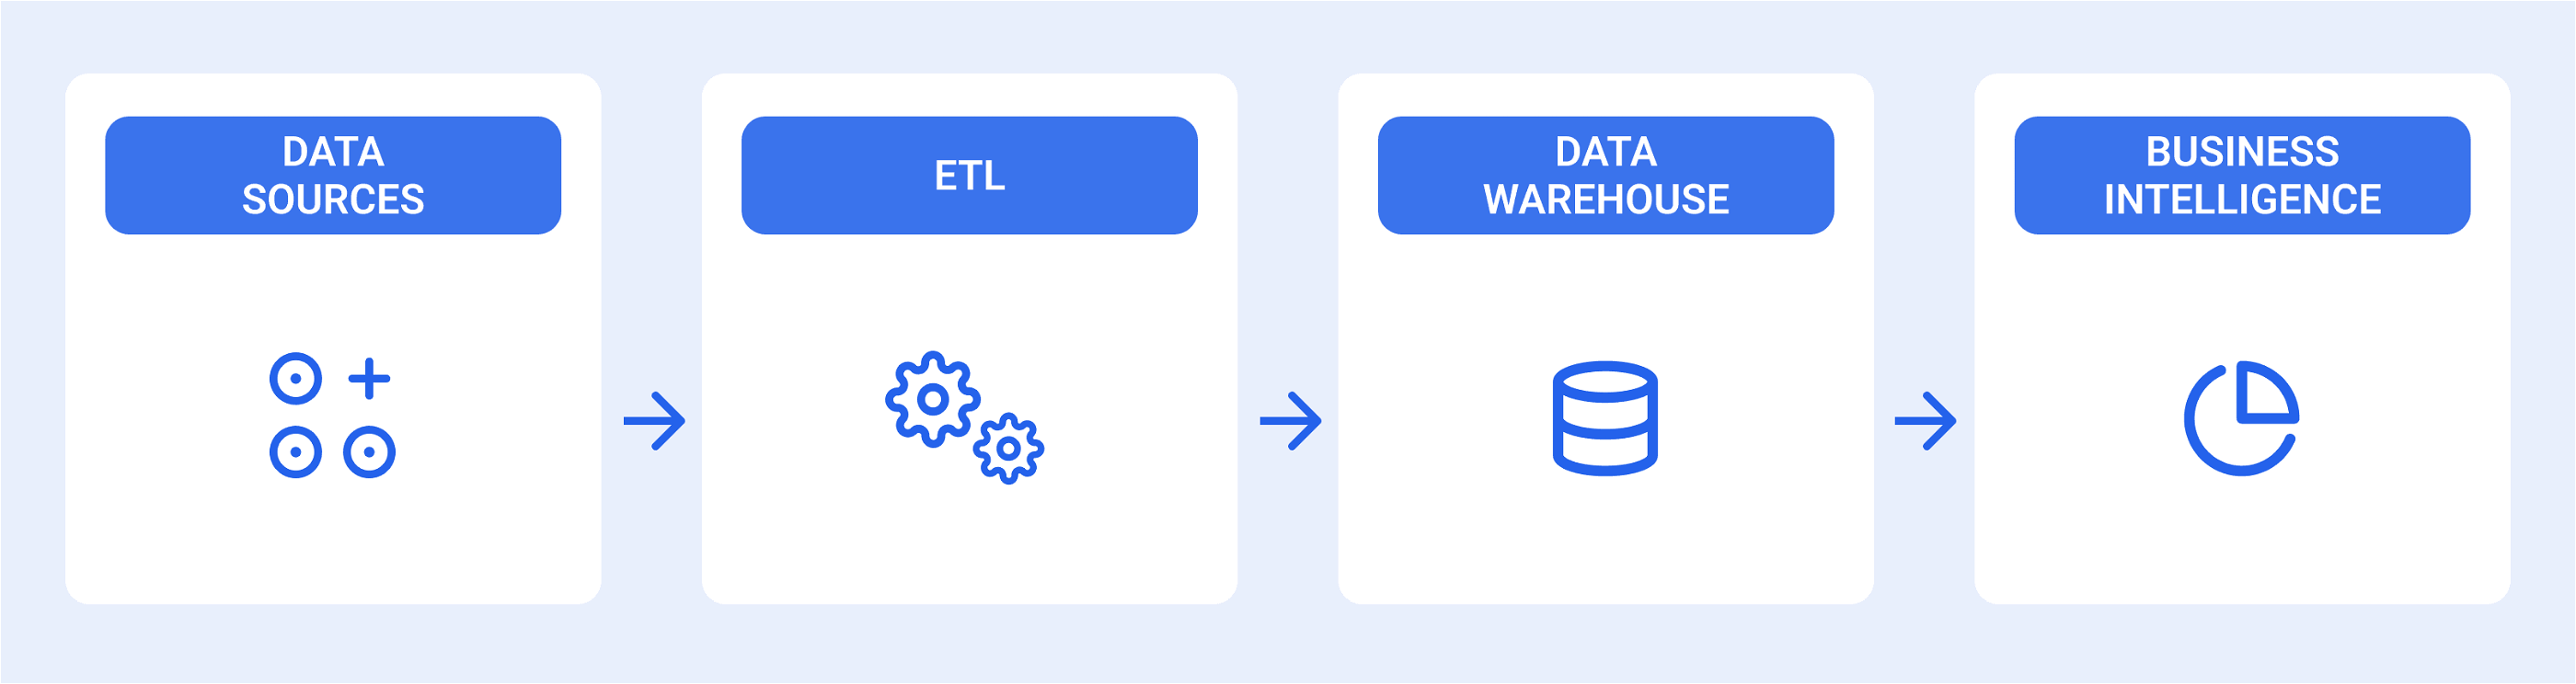 Data is extracted from diverse sources, transformed, and stored into a data warehouse for business intelligence.